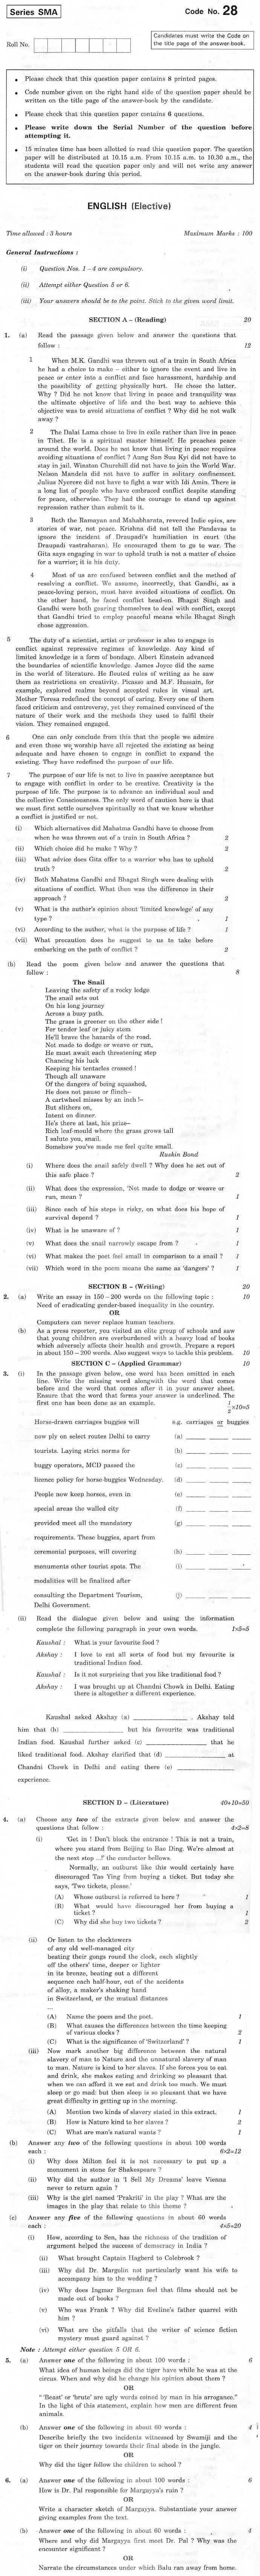 CBSE Class XII Previous Year Question Paper 2012 English (Elective)